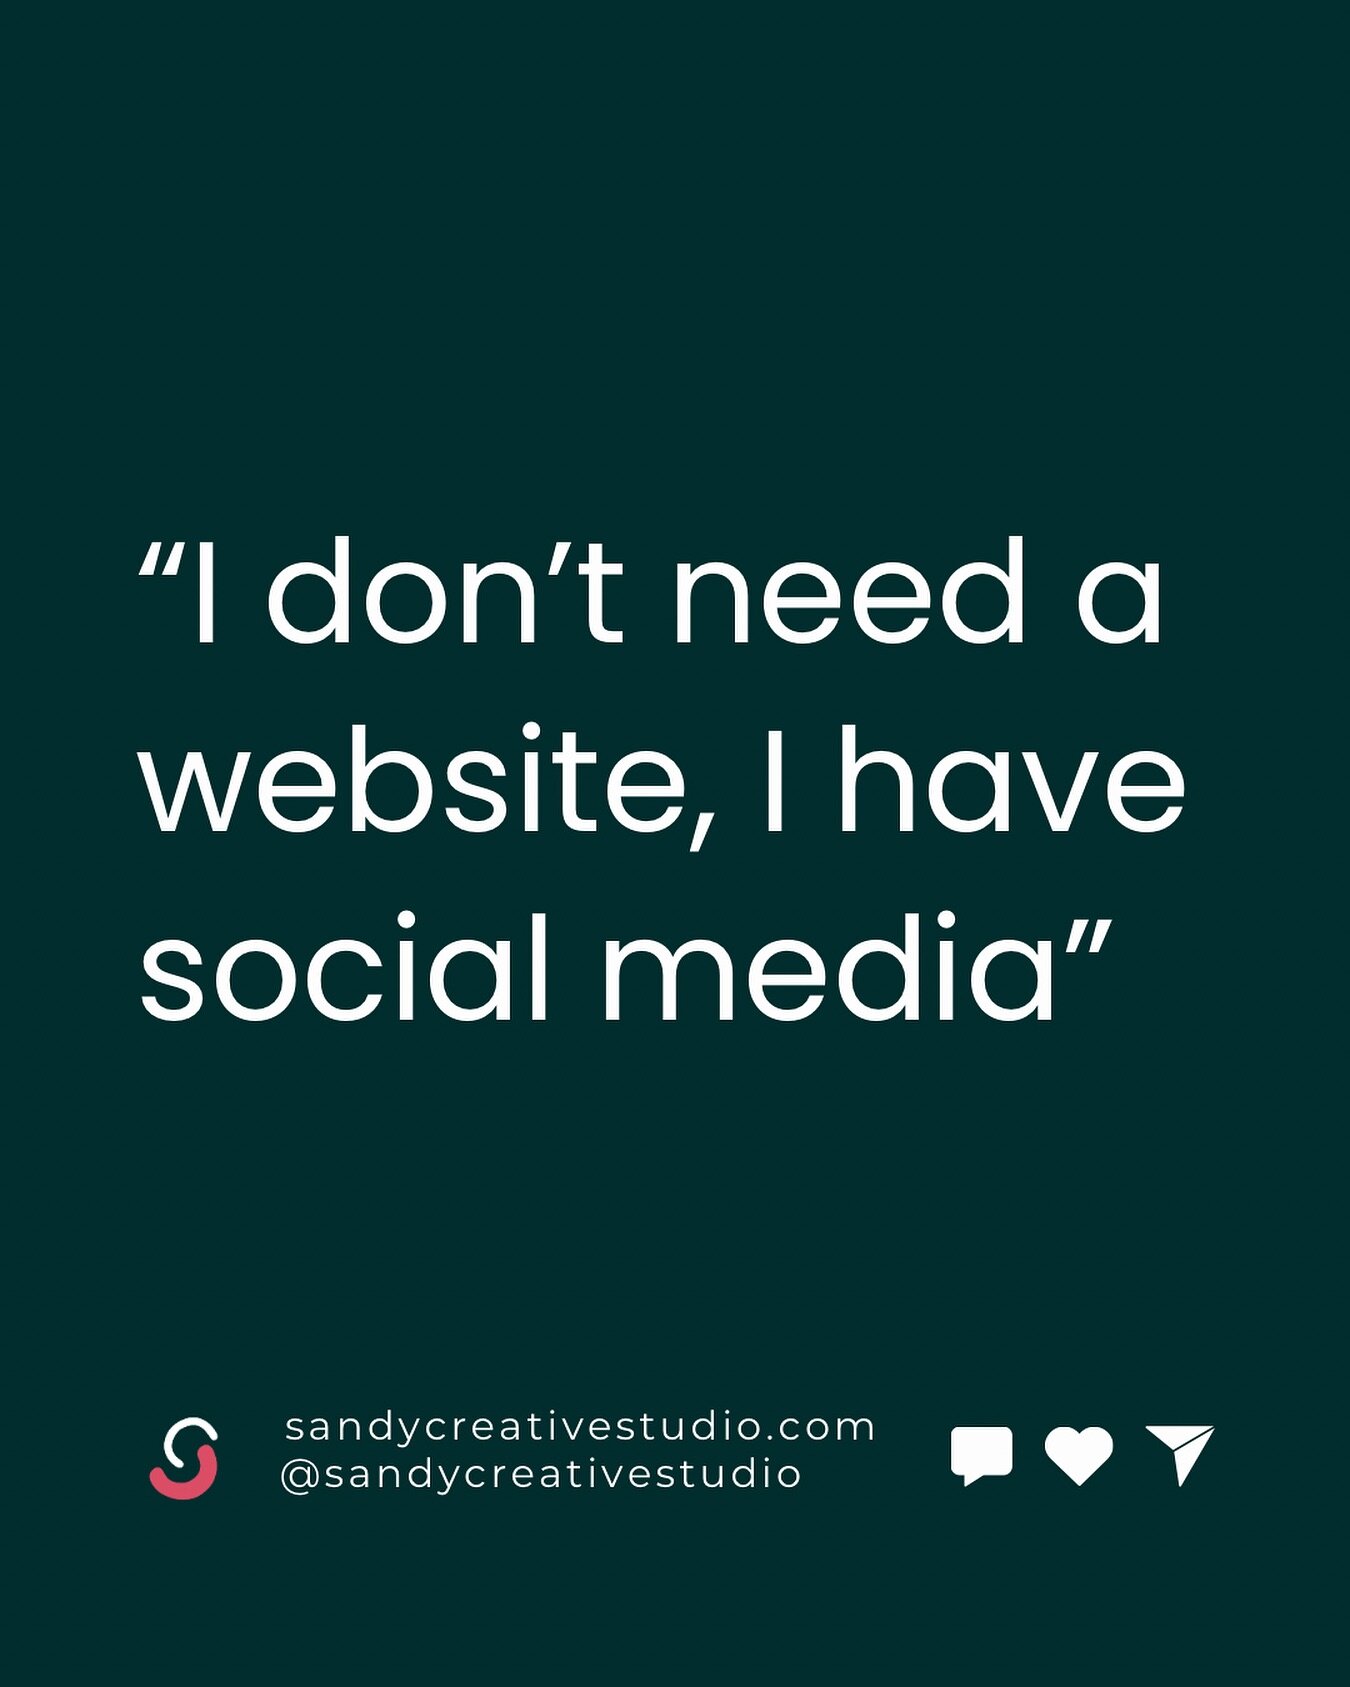 &ldquo;I don&rsquo;t need a website, I have social media.&rdquo; 
Listen, I love social media, especially for businesses. I completely understand the value social media brings, but let me share why having a website is equally important:

⭐️ Having a 